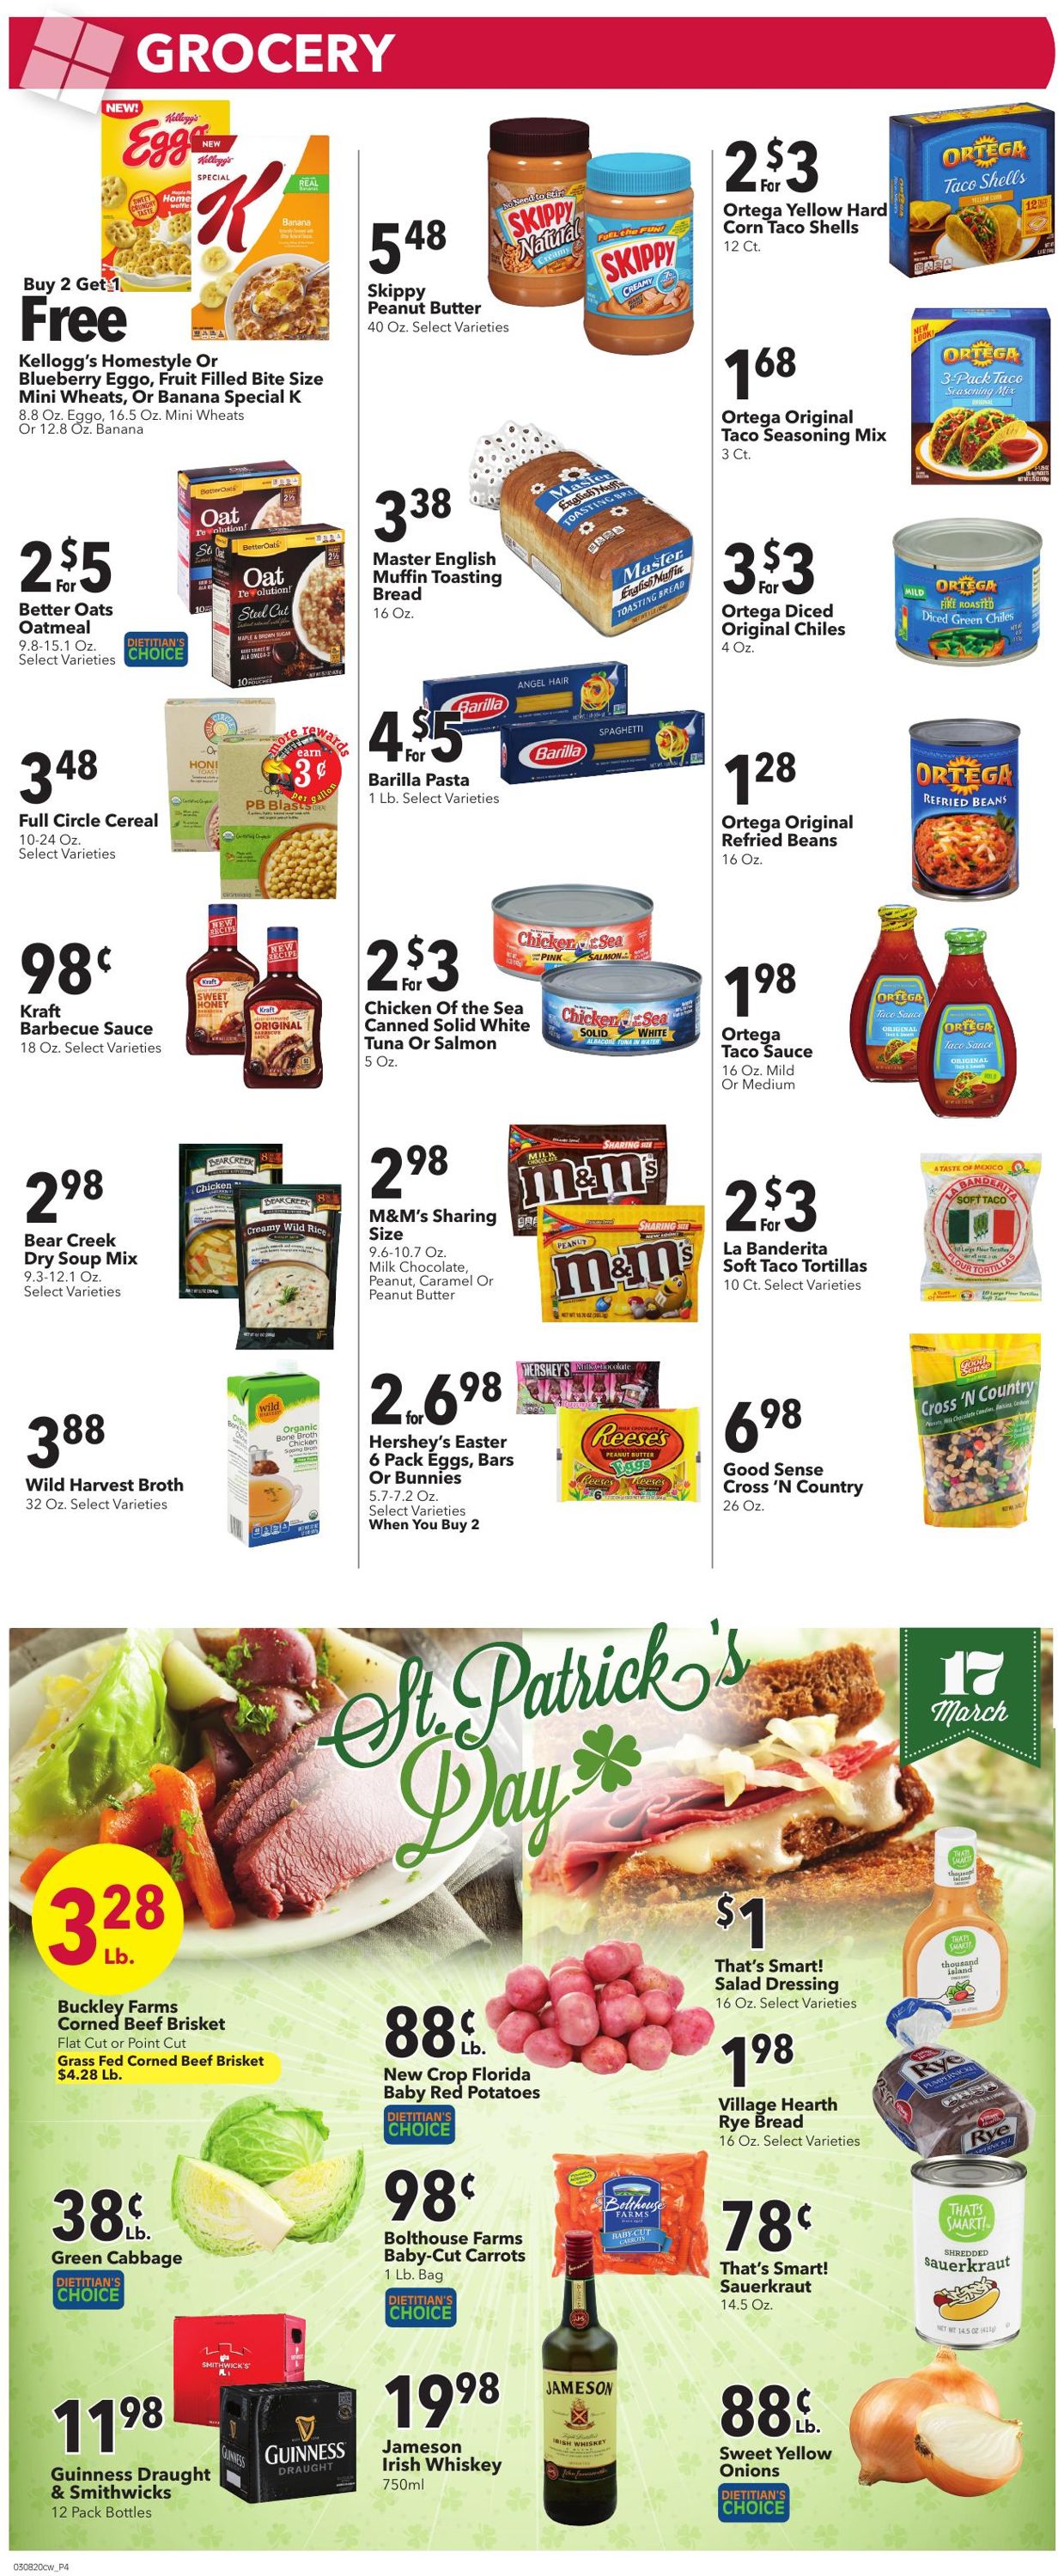 Cash Wise Weekly Ad Circular - valid 03/07-03/17/2020 (Page 4)